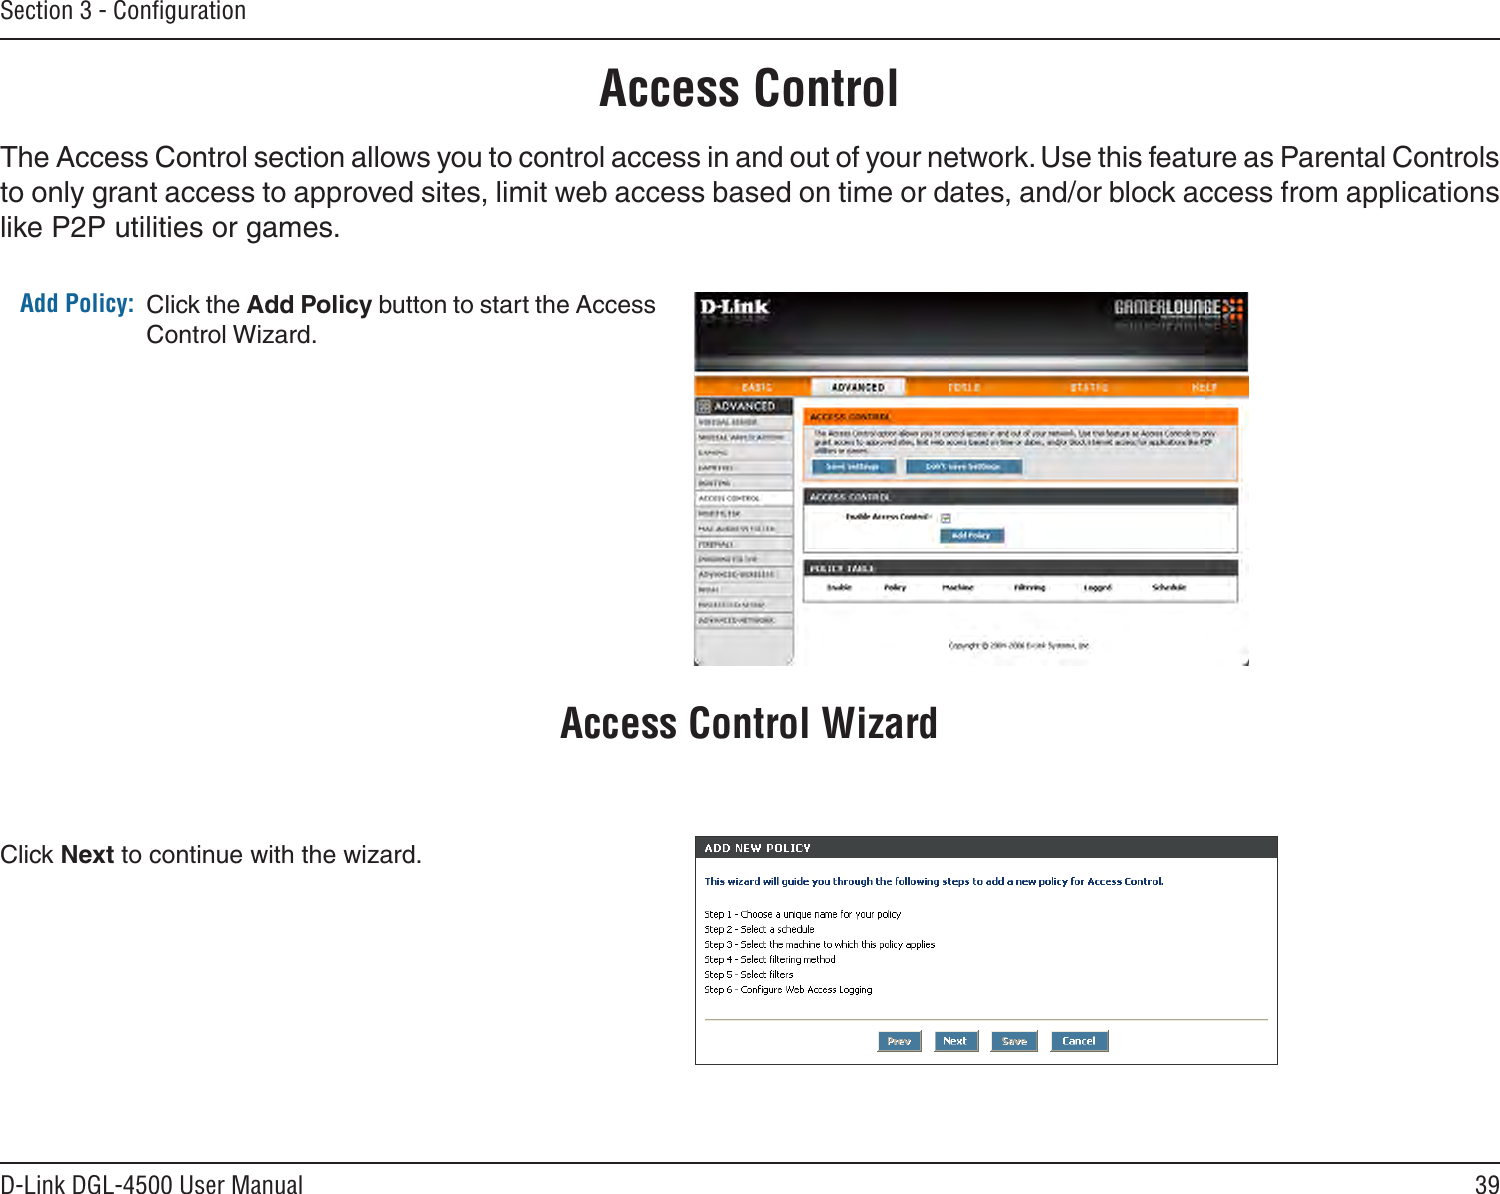 39D-Link DGL-4500 User ManualSection 3 - ConﬁgurationAccess ControlClick the Add Policy button to start the Access Control Wizard. Add Policy:The Access Control section allows you to control access in and out of your network. Use this feature as Parental Controls to only grant access to approved sites, limit web access based on time or dates, and/or block access from applications like P2P utilities or games.Click Next to continue with the wizard.Access Control Wizard